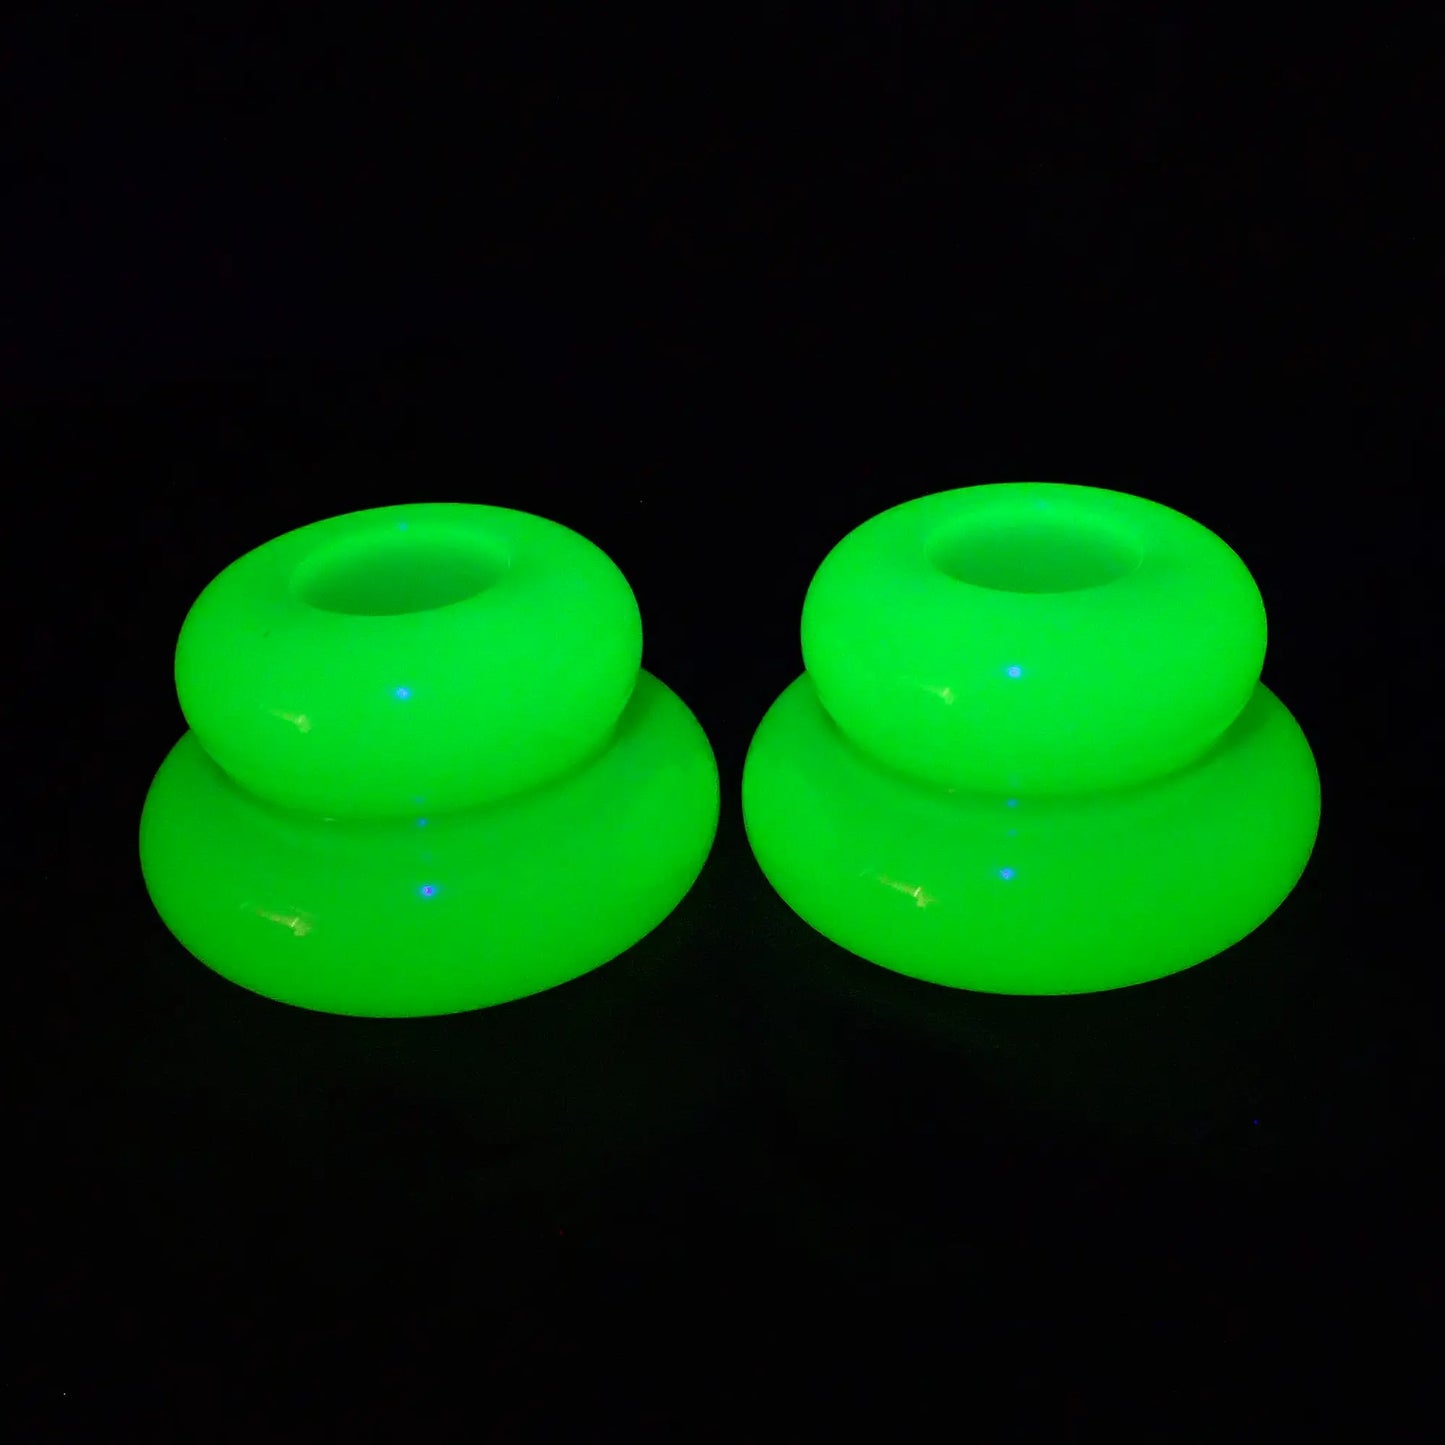 Photo showing the bright neon yellow puffy round double ring candlestick holders fluorescing bright green under a UV light.